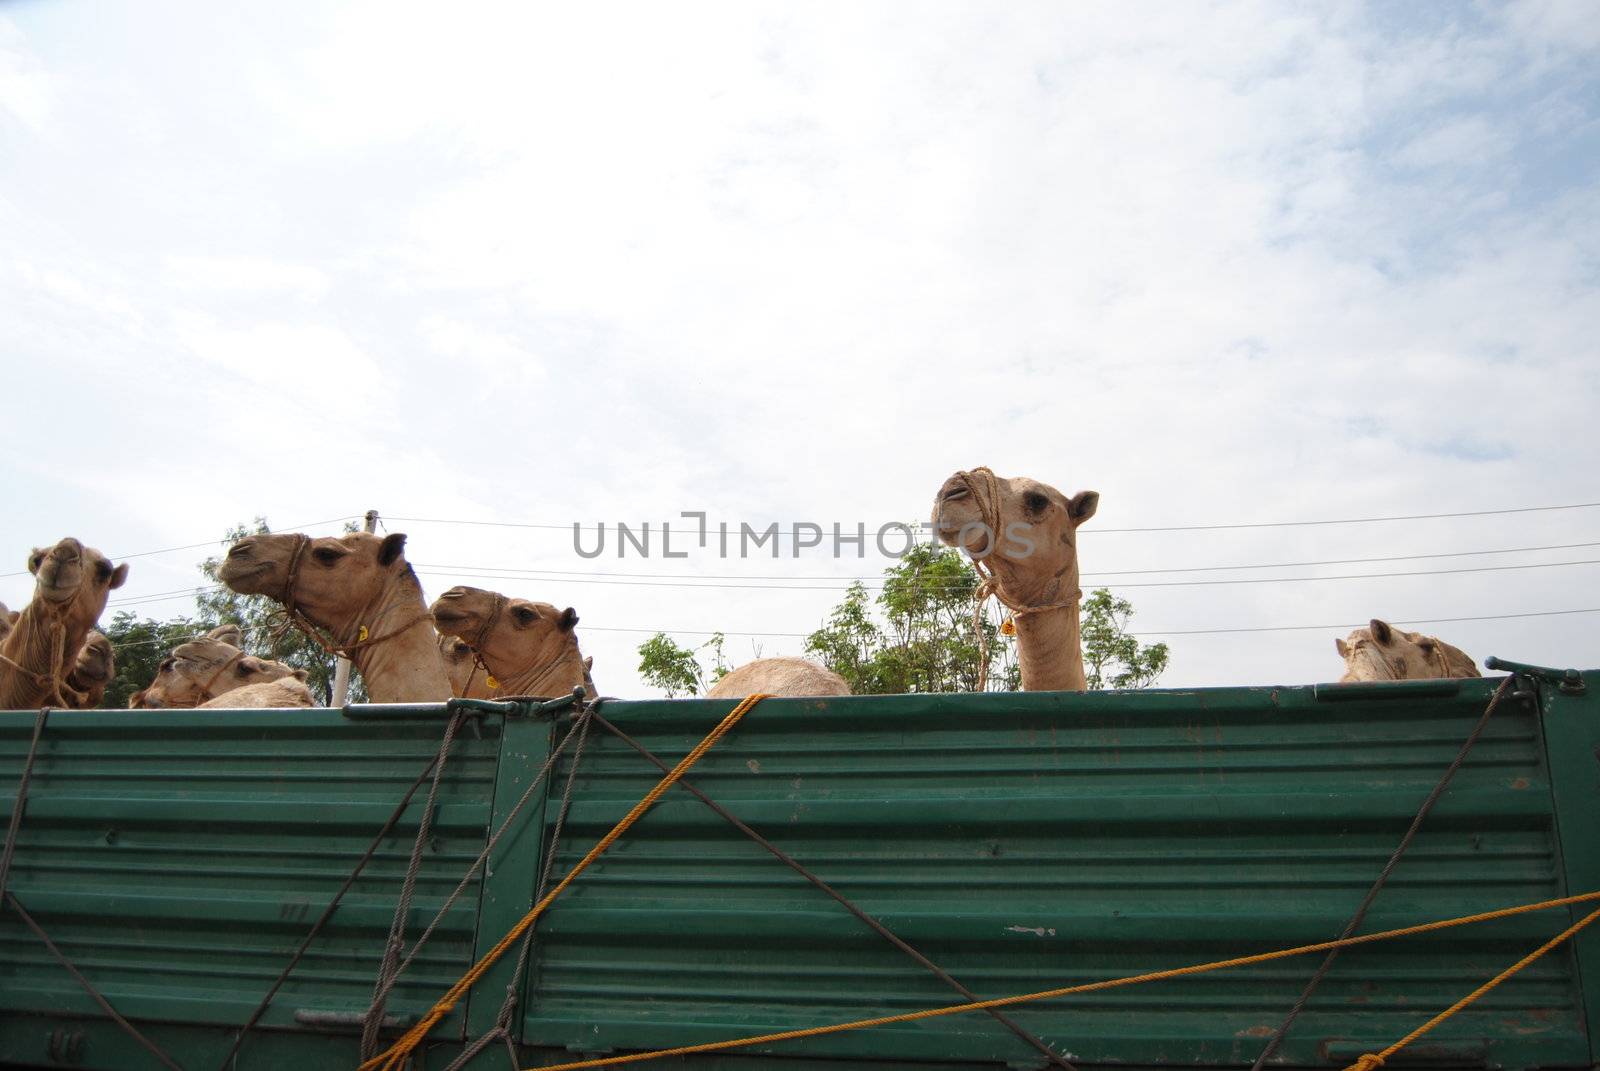 camels on truck